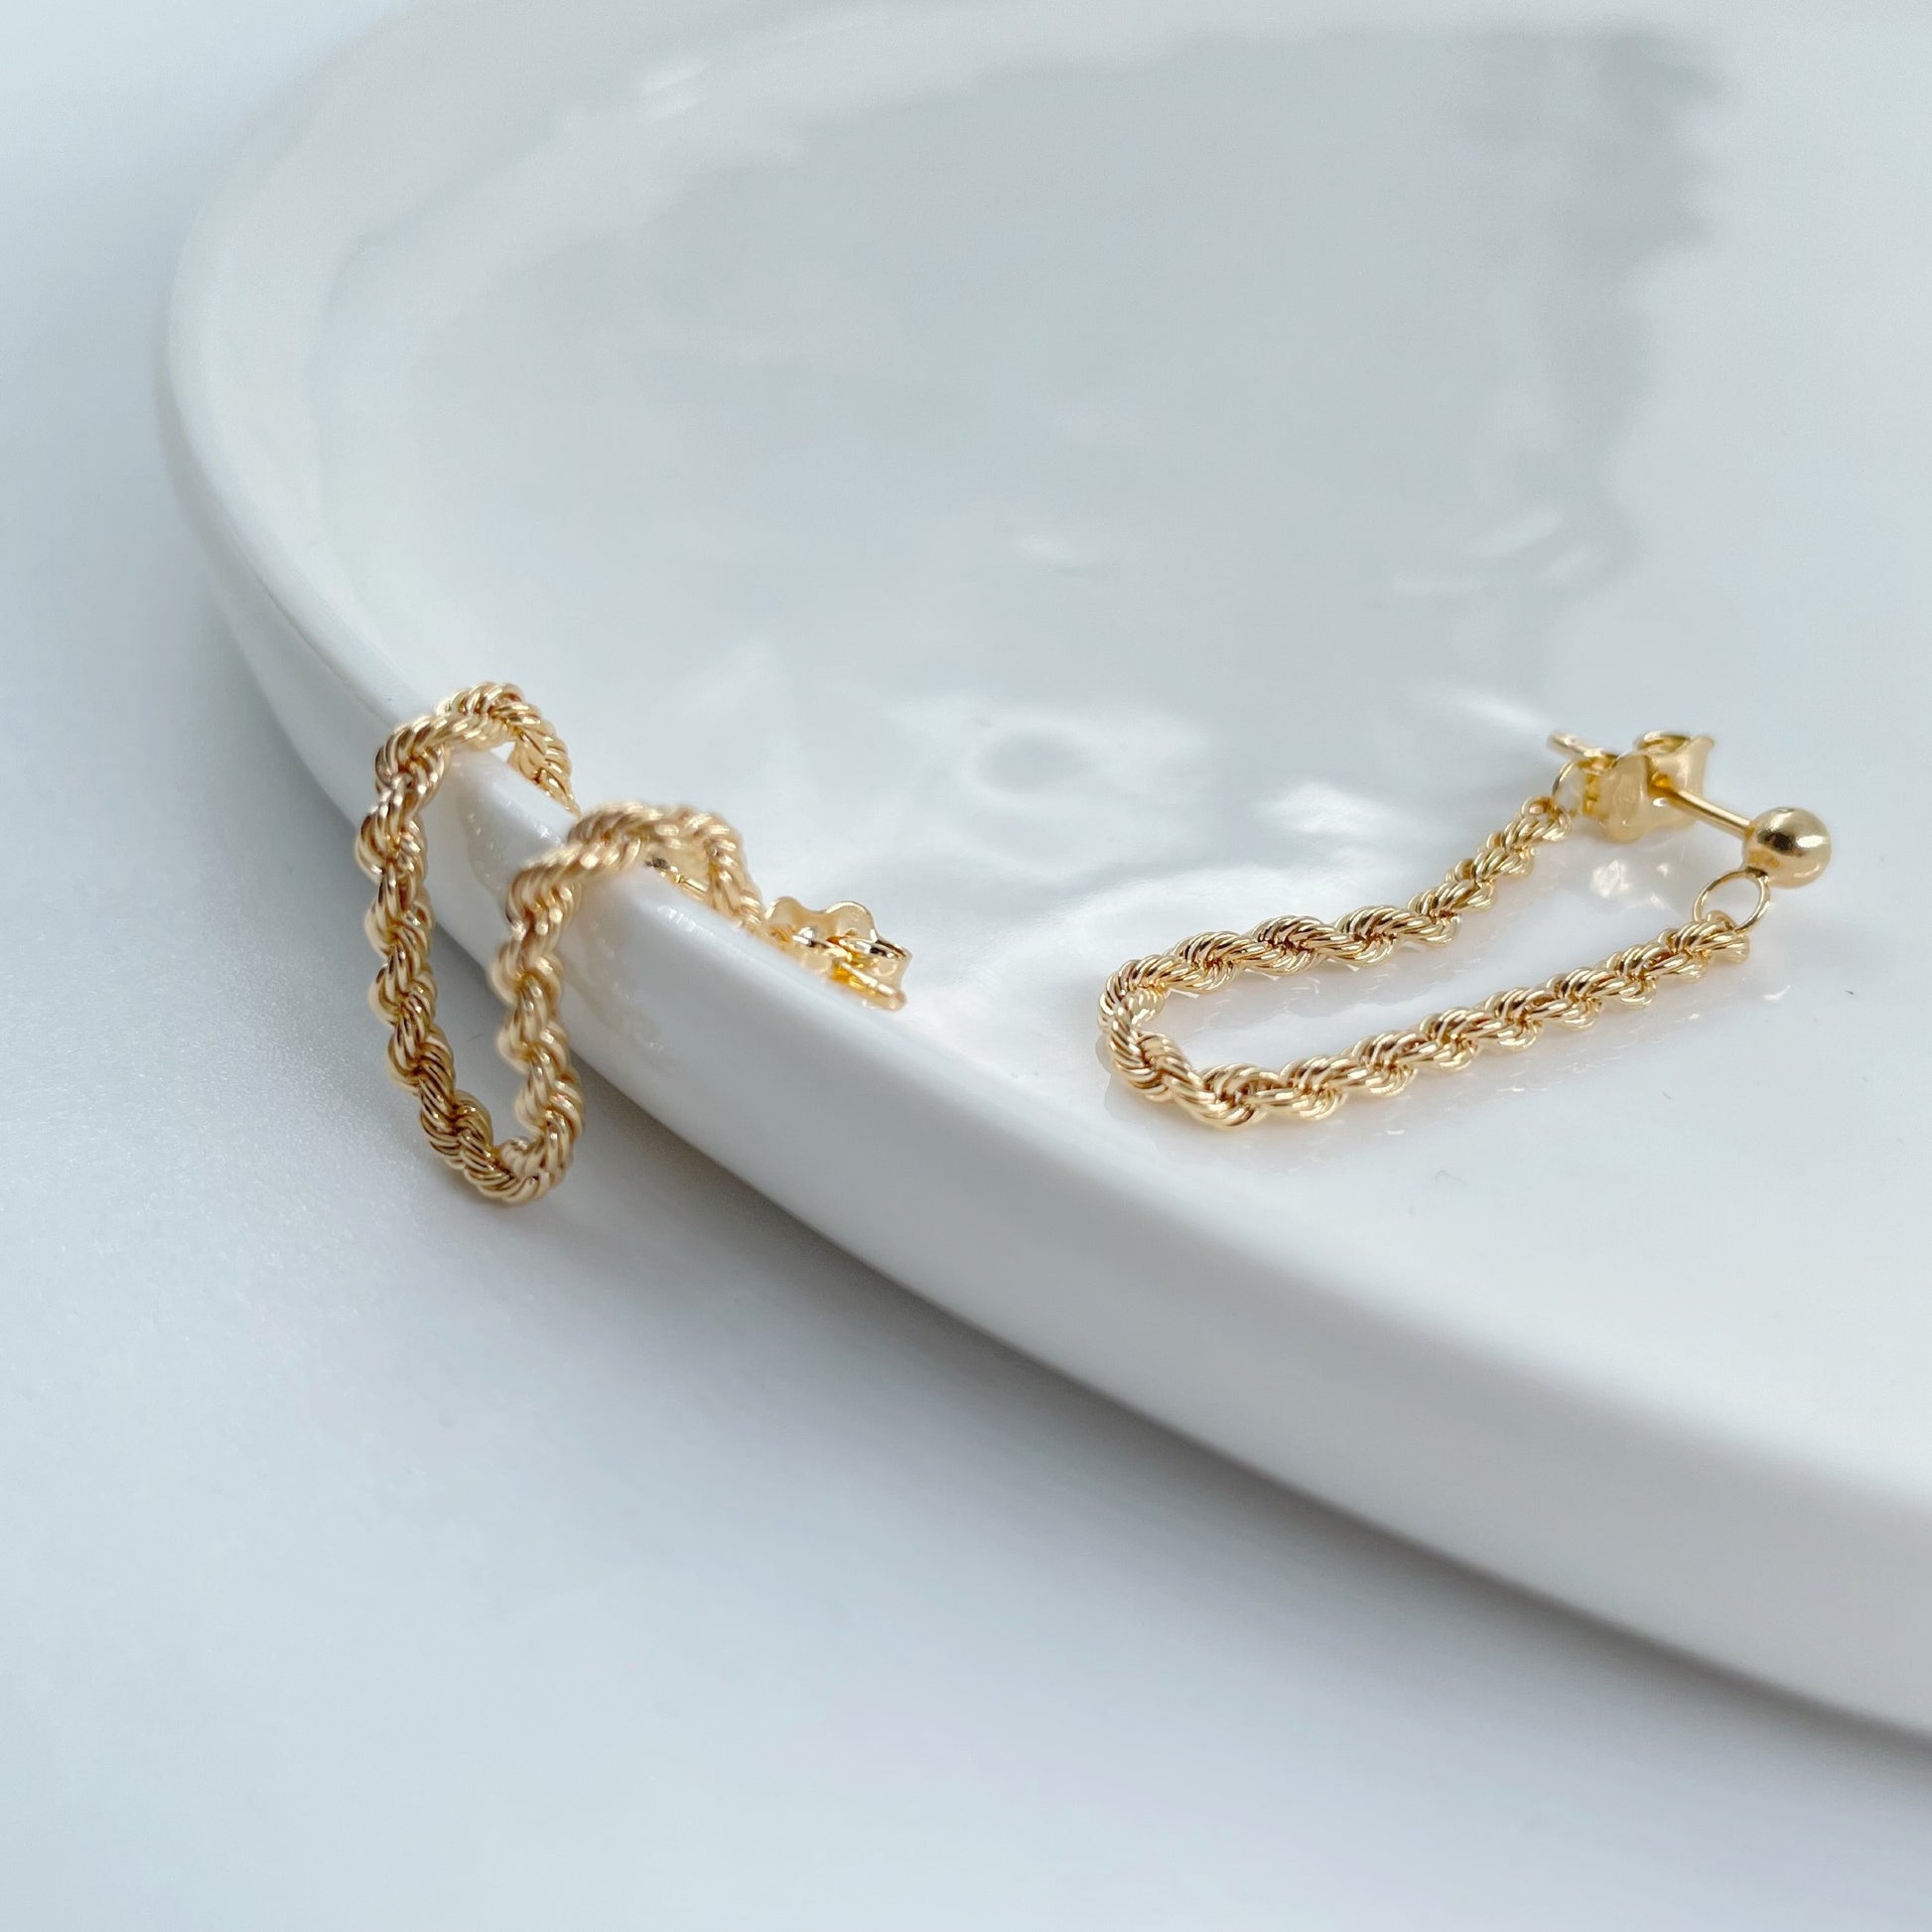 9kt gold chain hoops by Collective & Co. online jewellery store